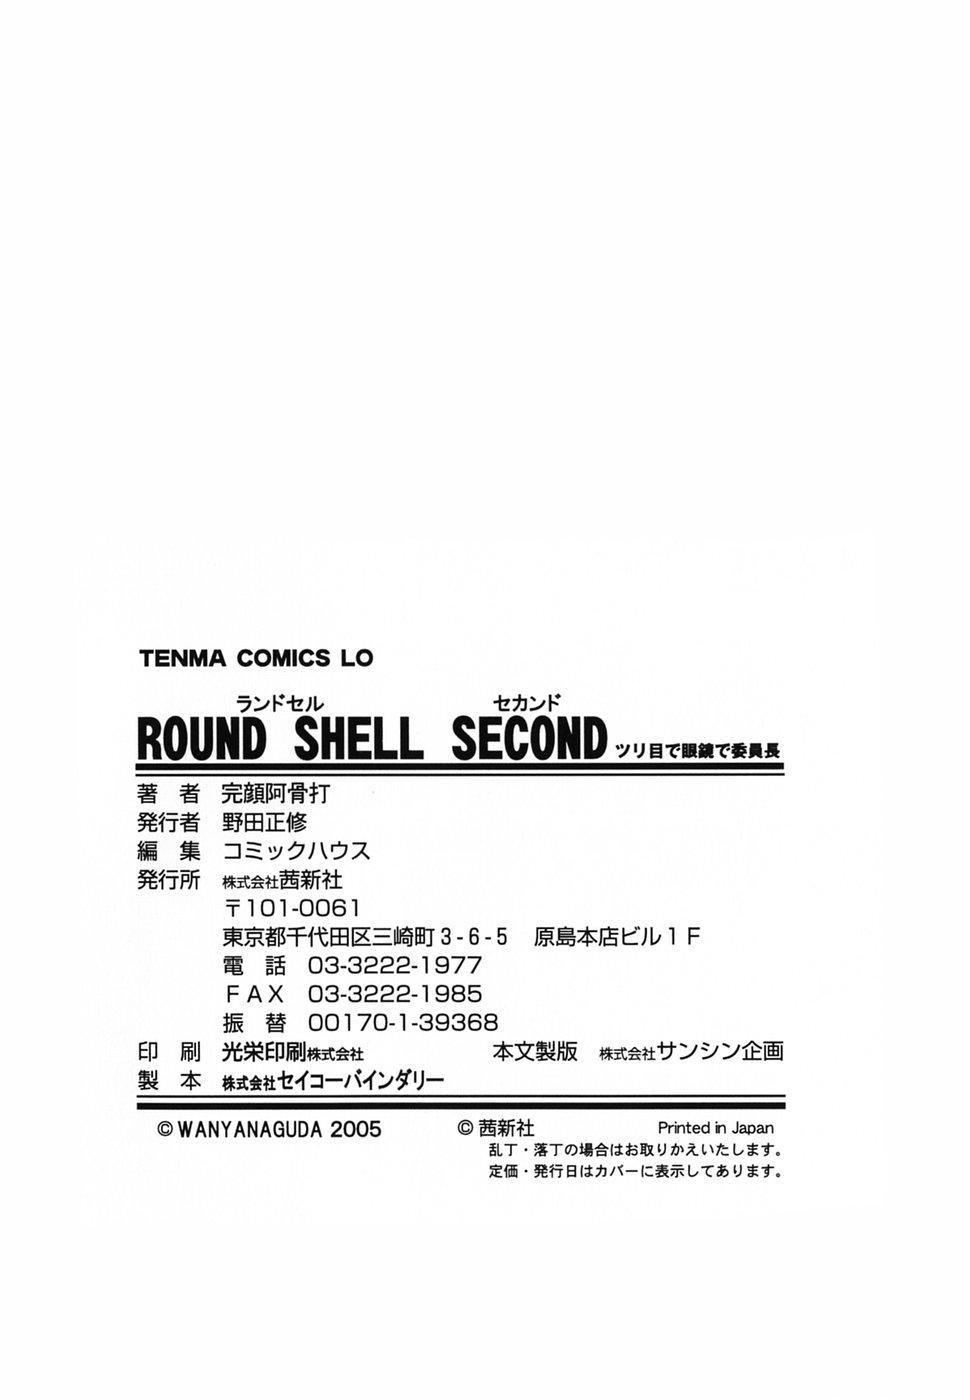 Round Shell Second 146